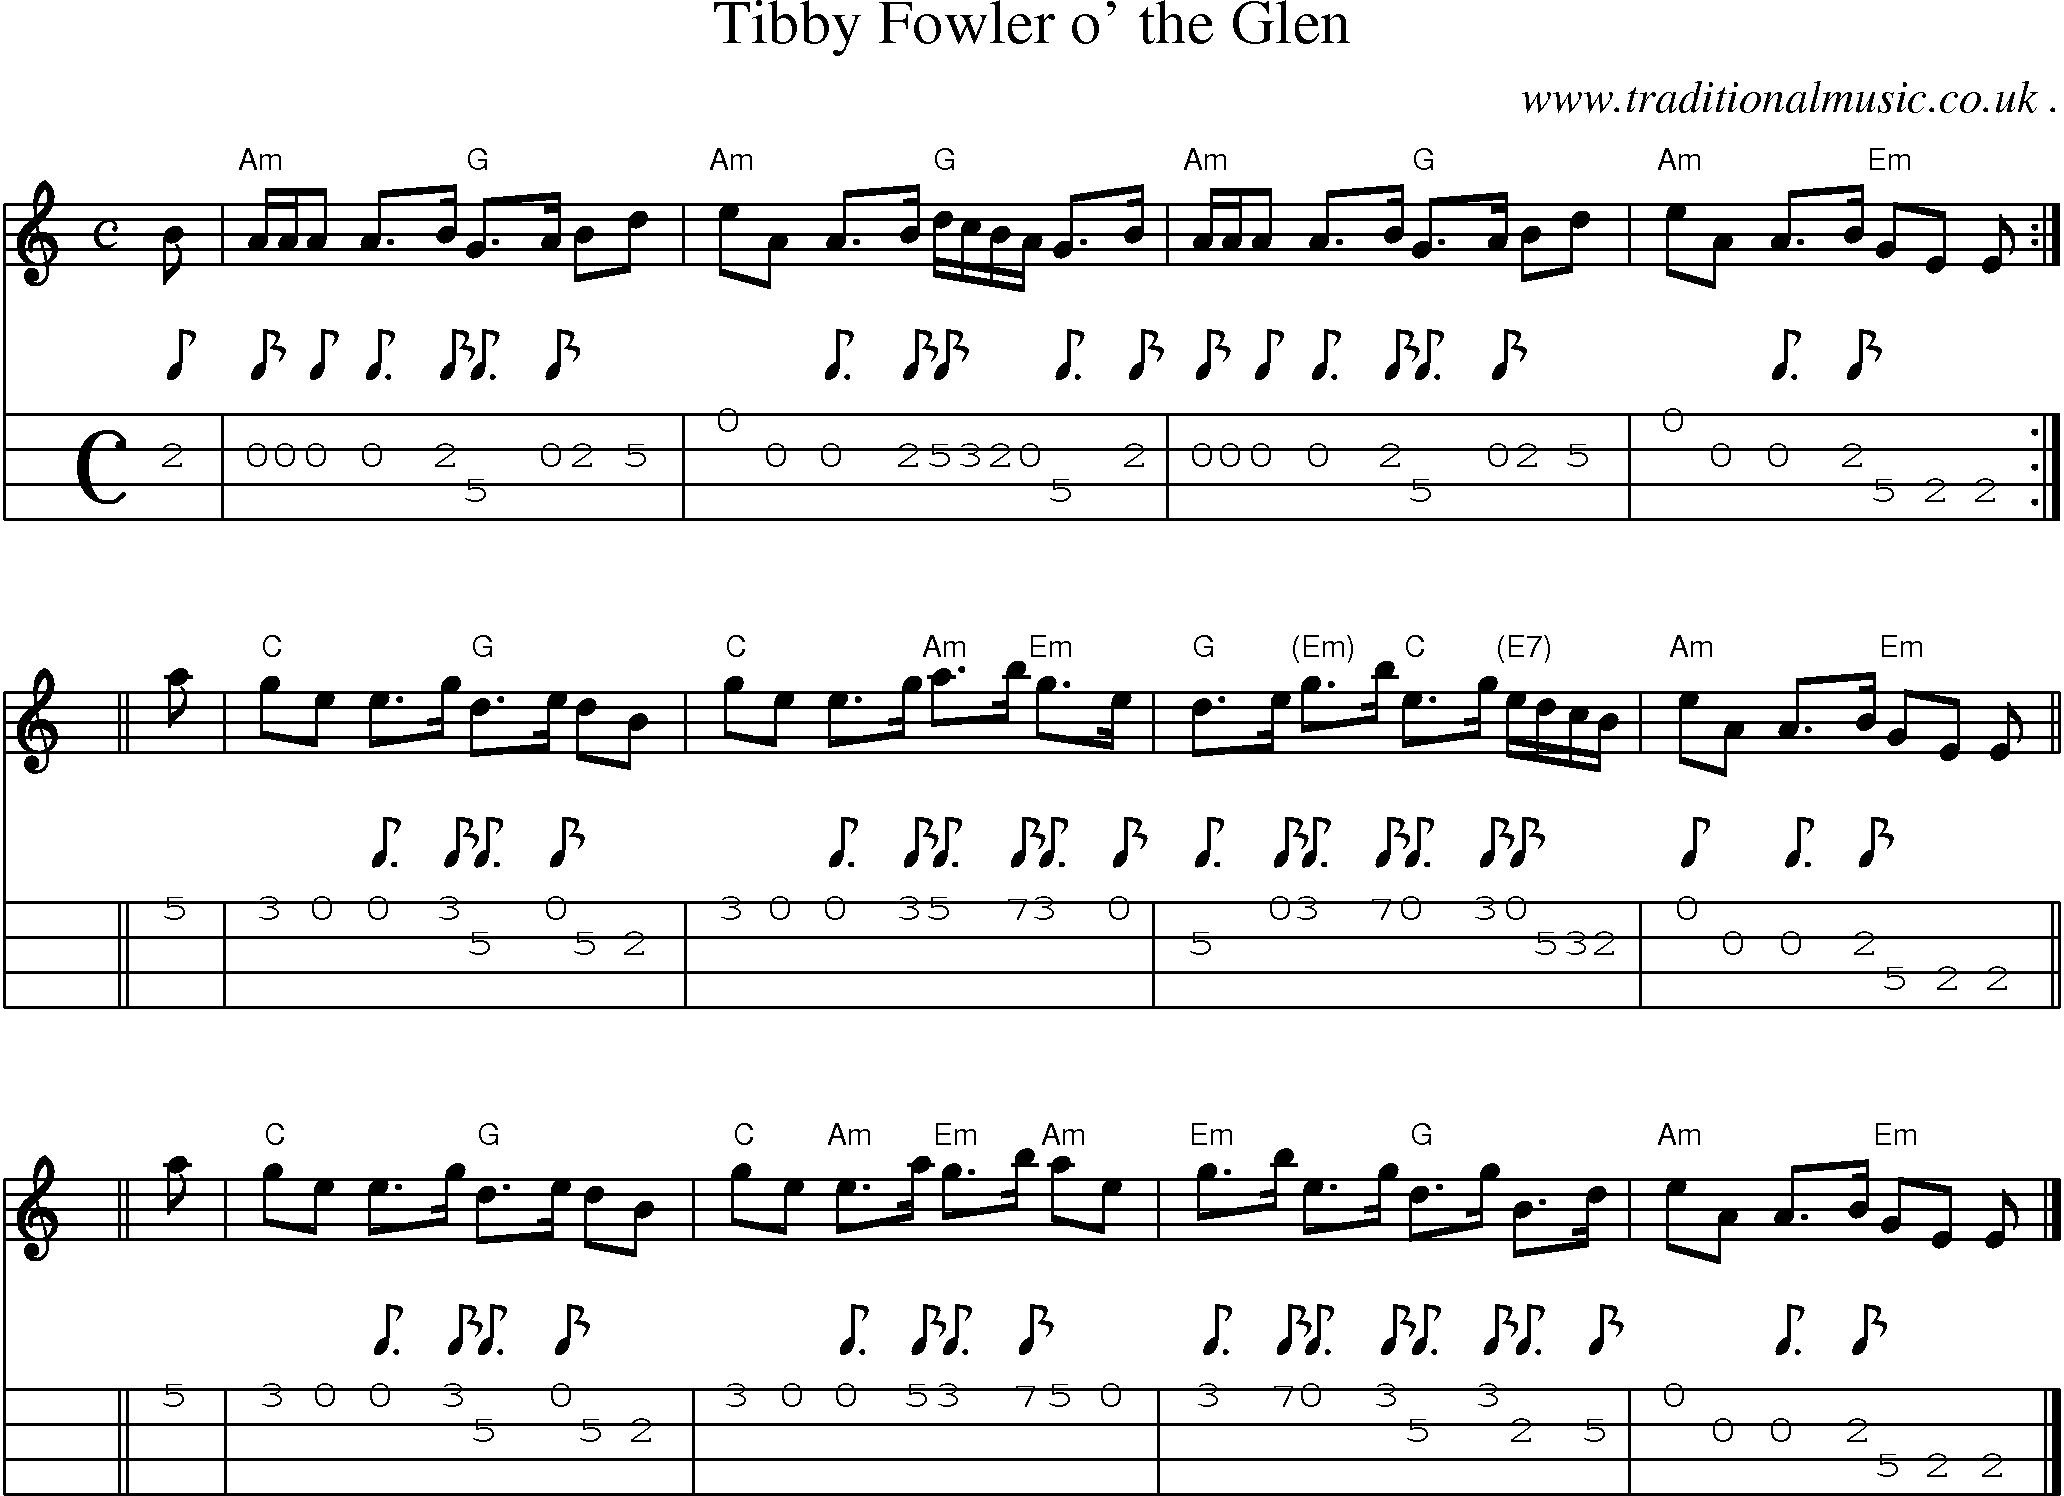 Sheet-music  score, Chords and Mandolin Tabs for Tibby Fowler O The Glen